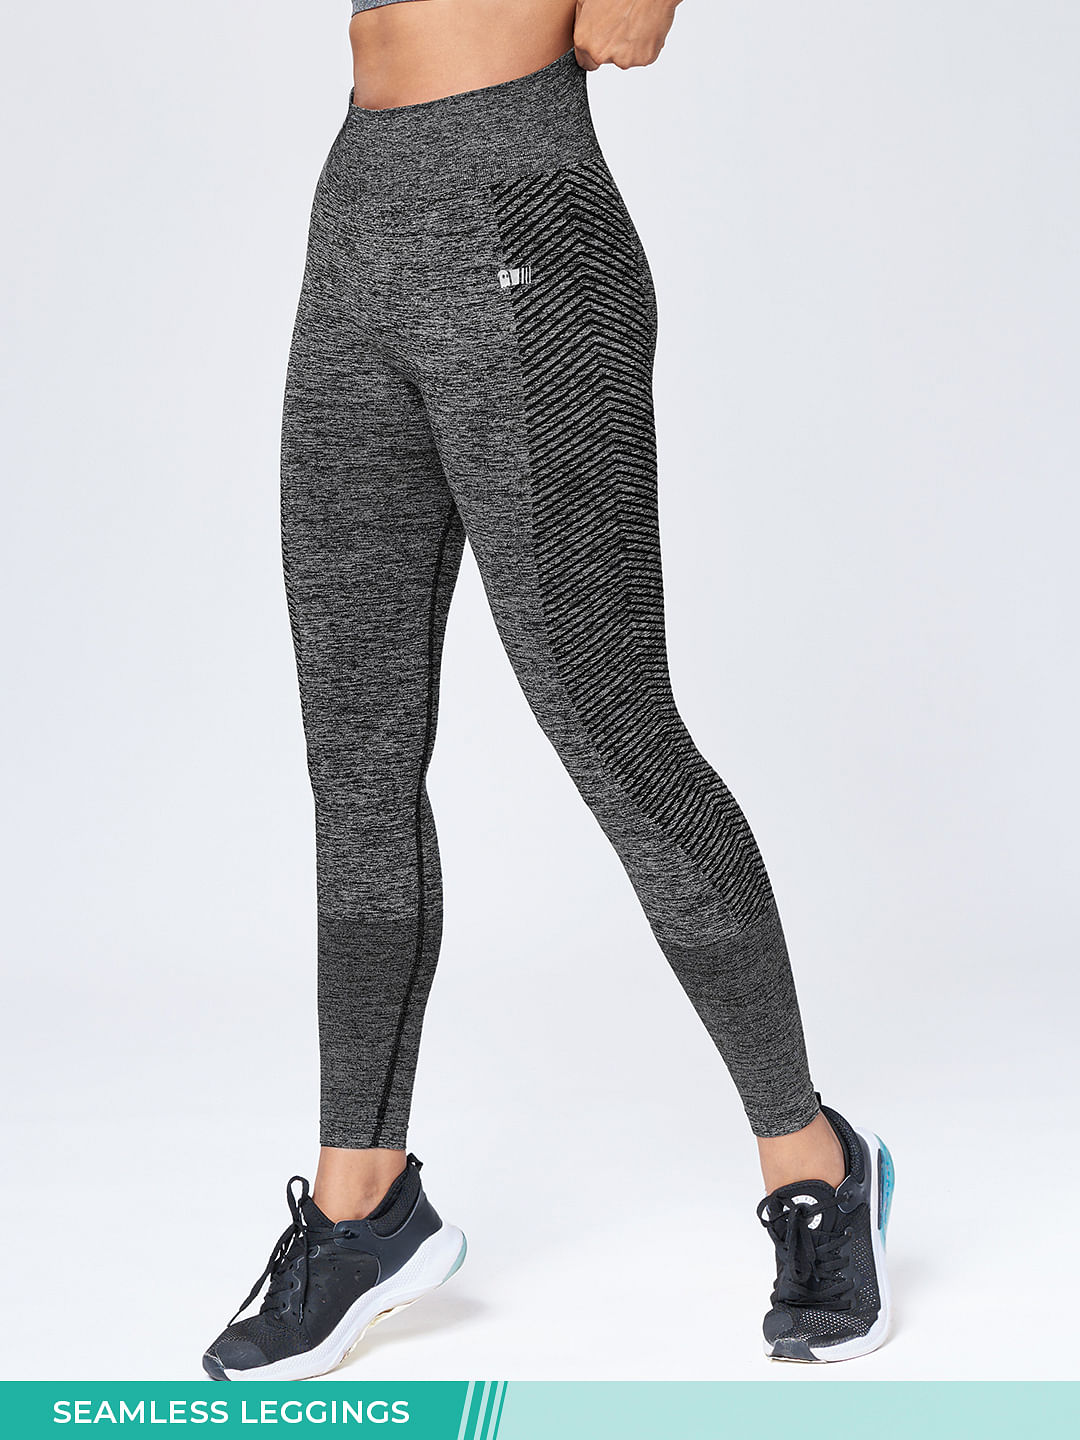 Buy TSS Active Seamless Anthra Women Training Sports Tights Online